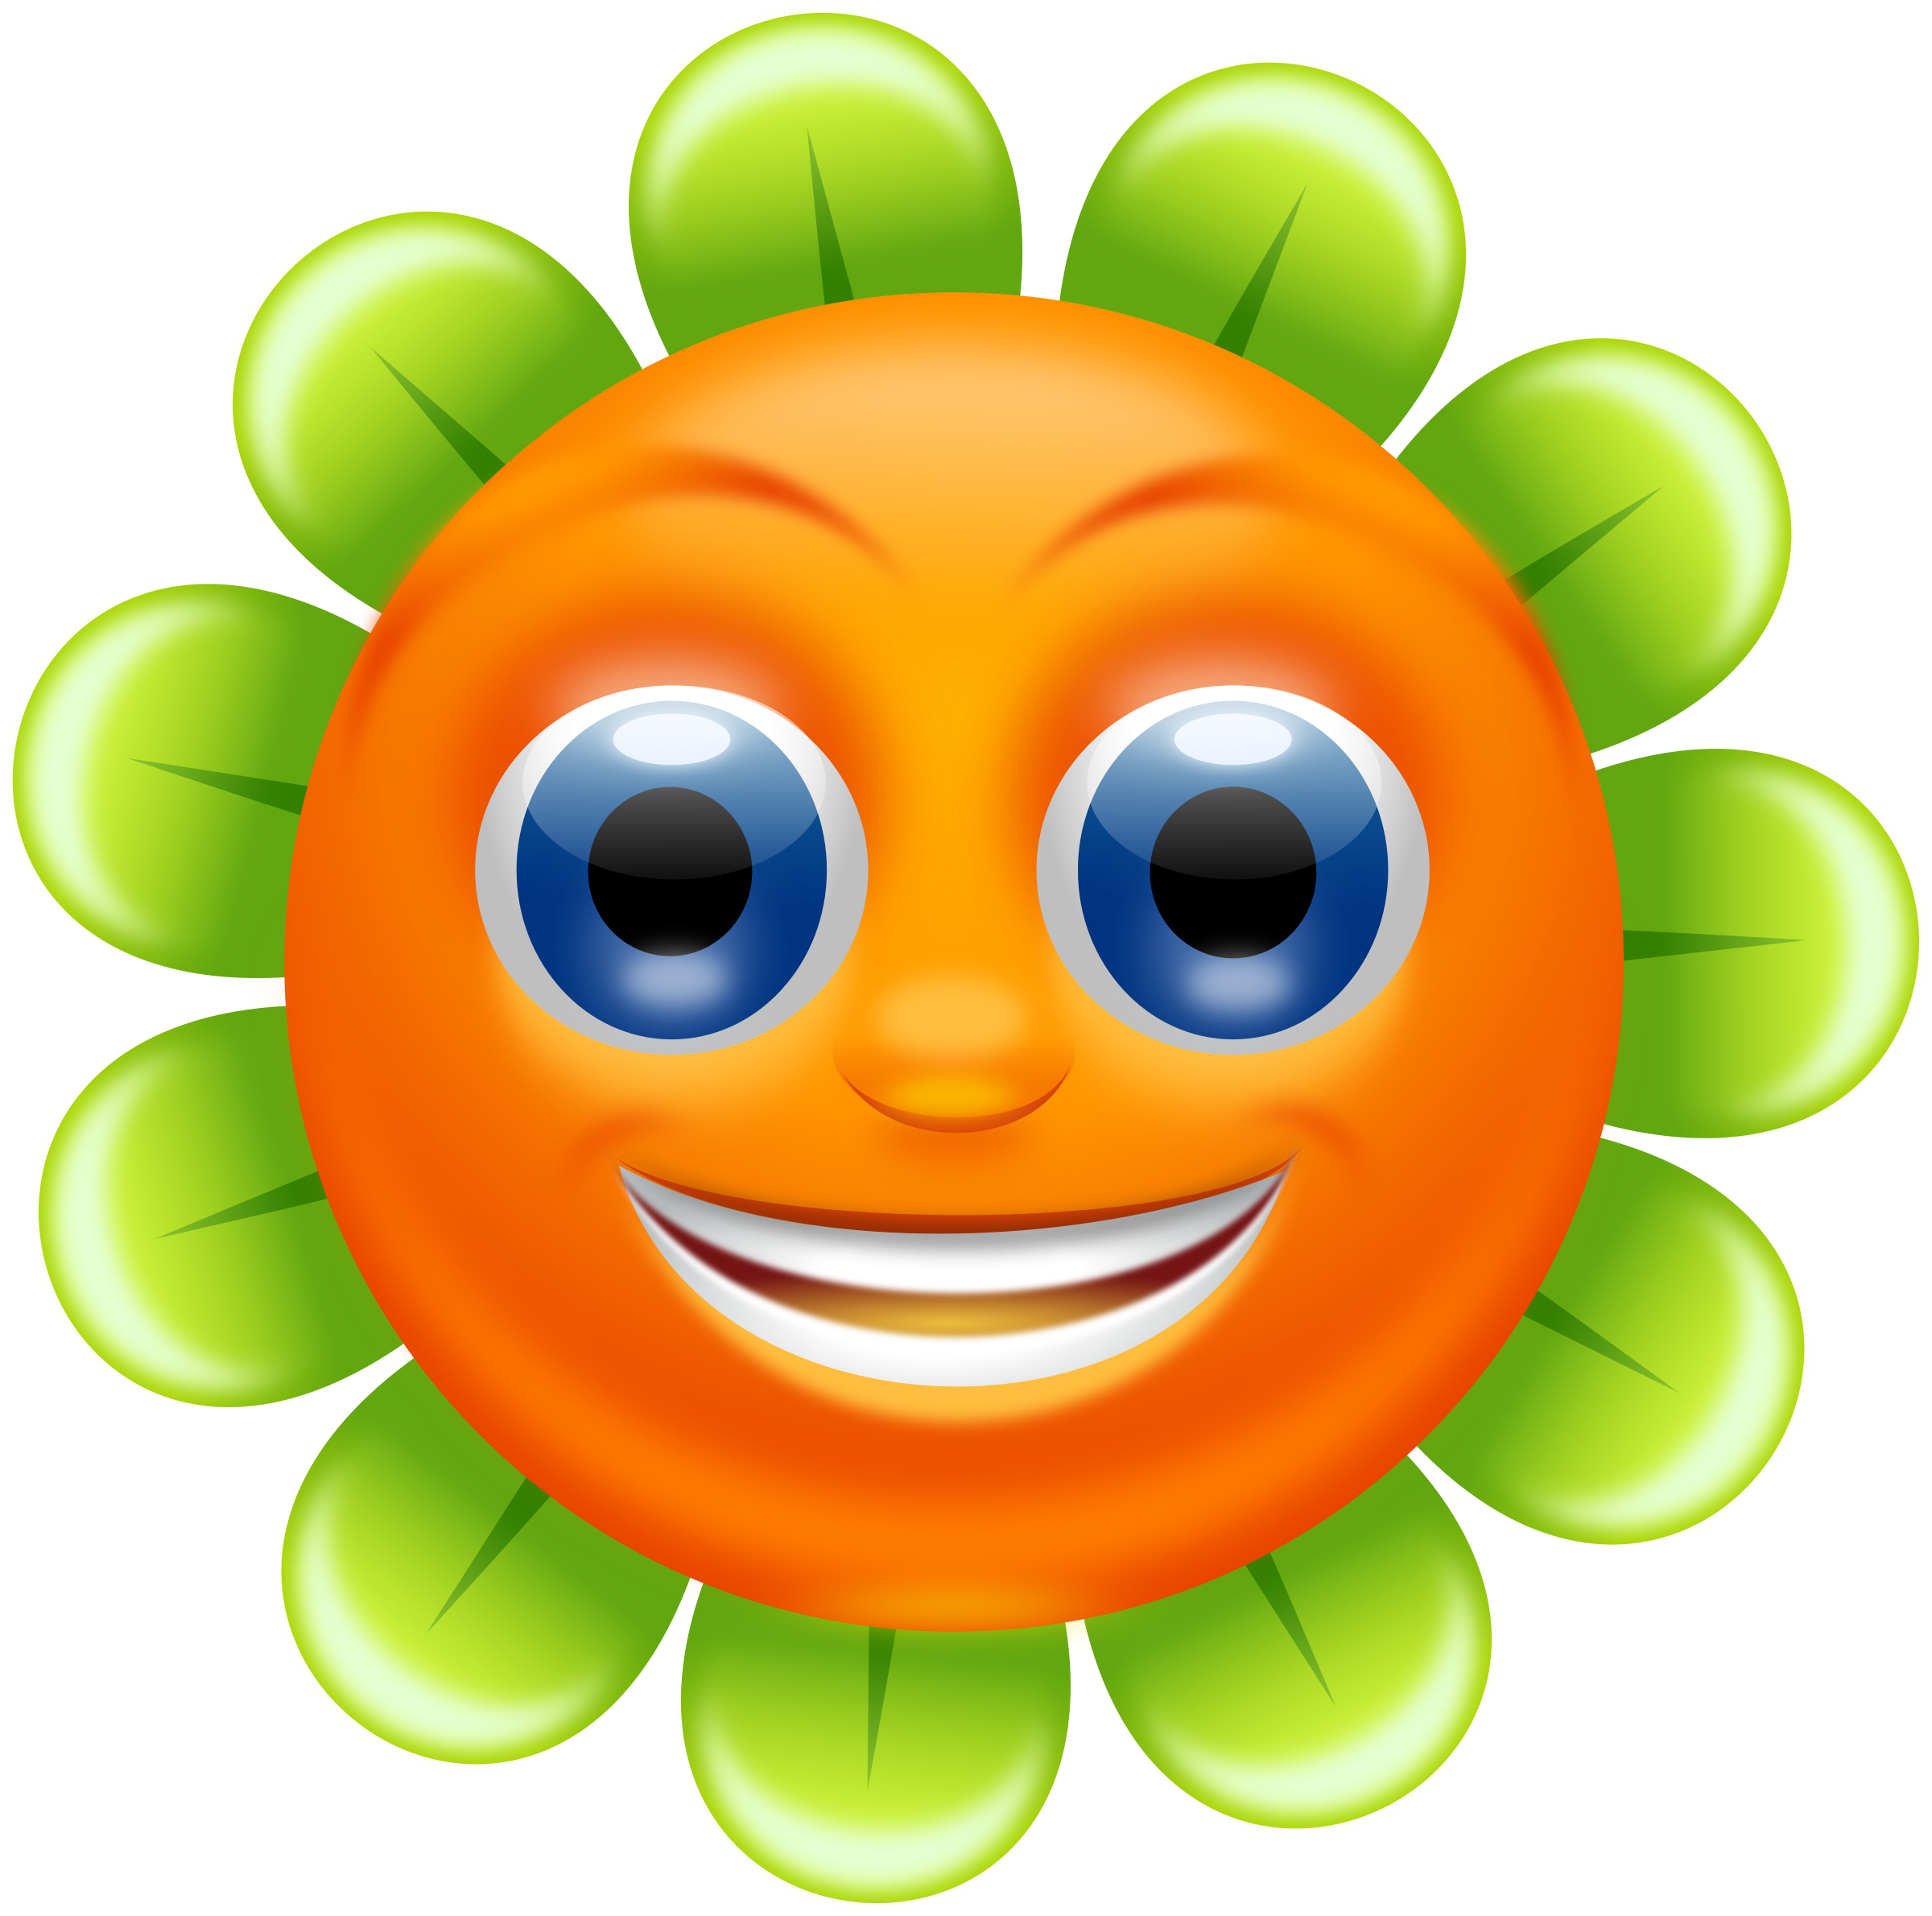 ms office clipart smiley - photo #38